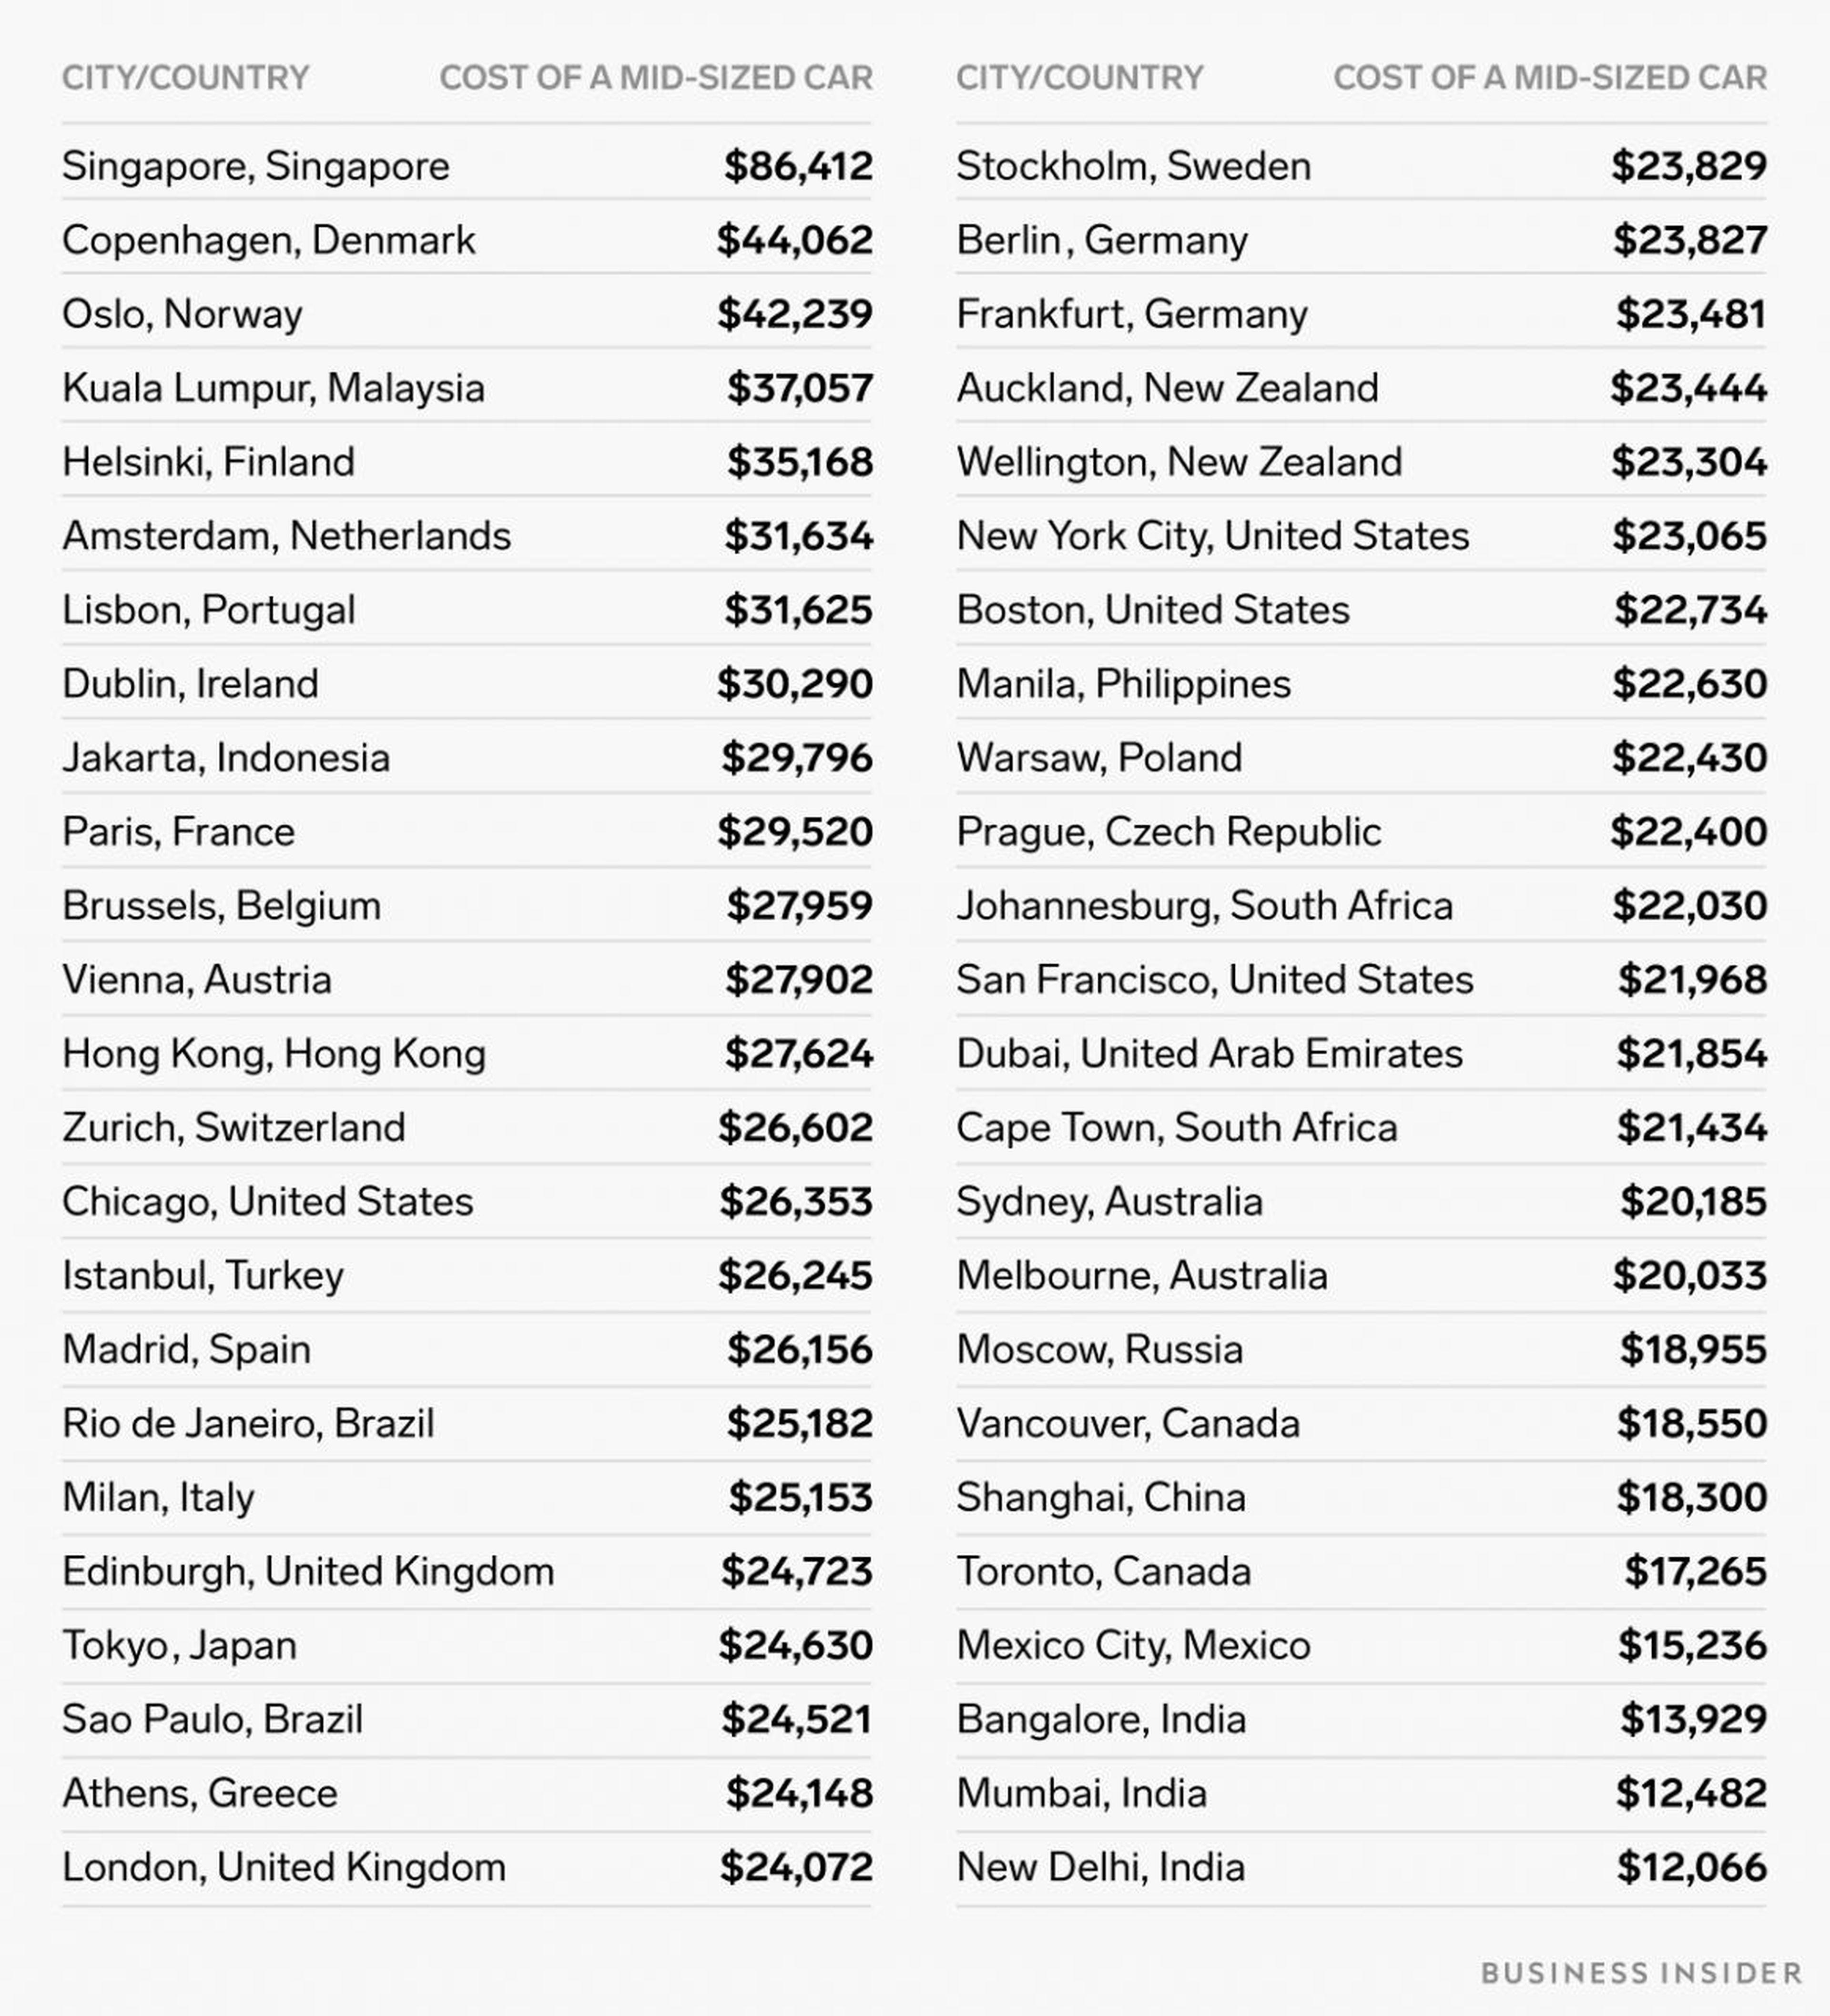 Singapore is the most expensive place to buy a car, while New Delhi is the cheapest.